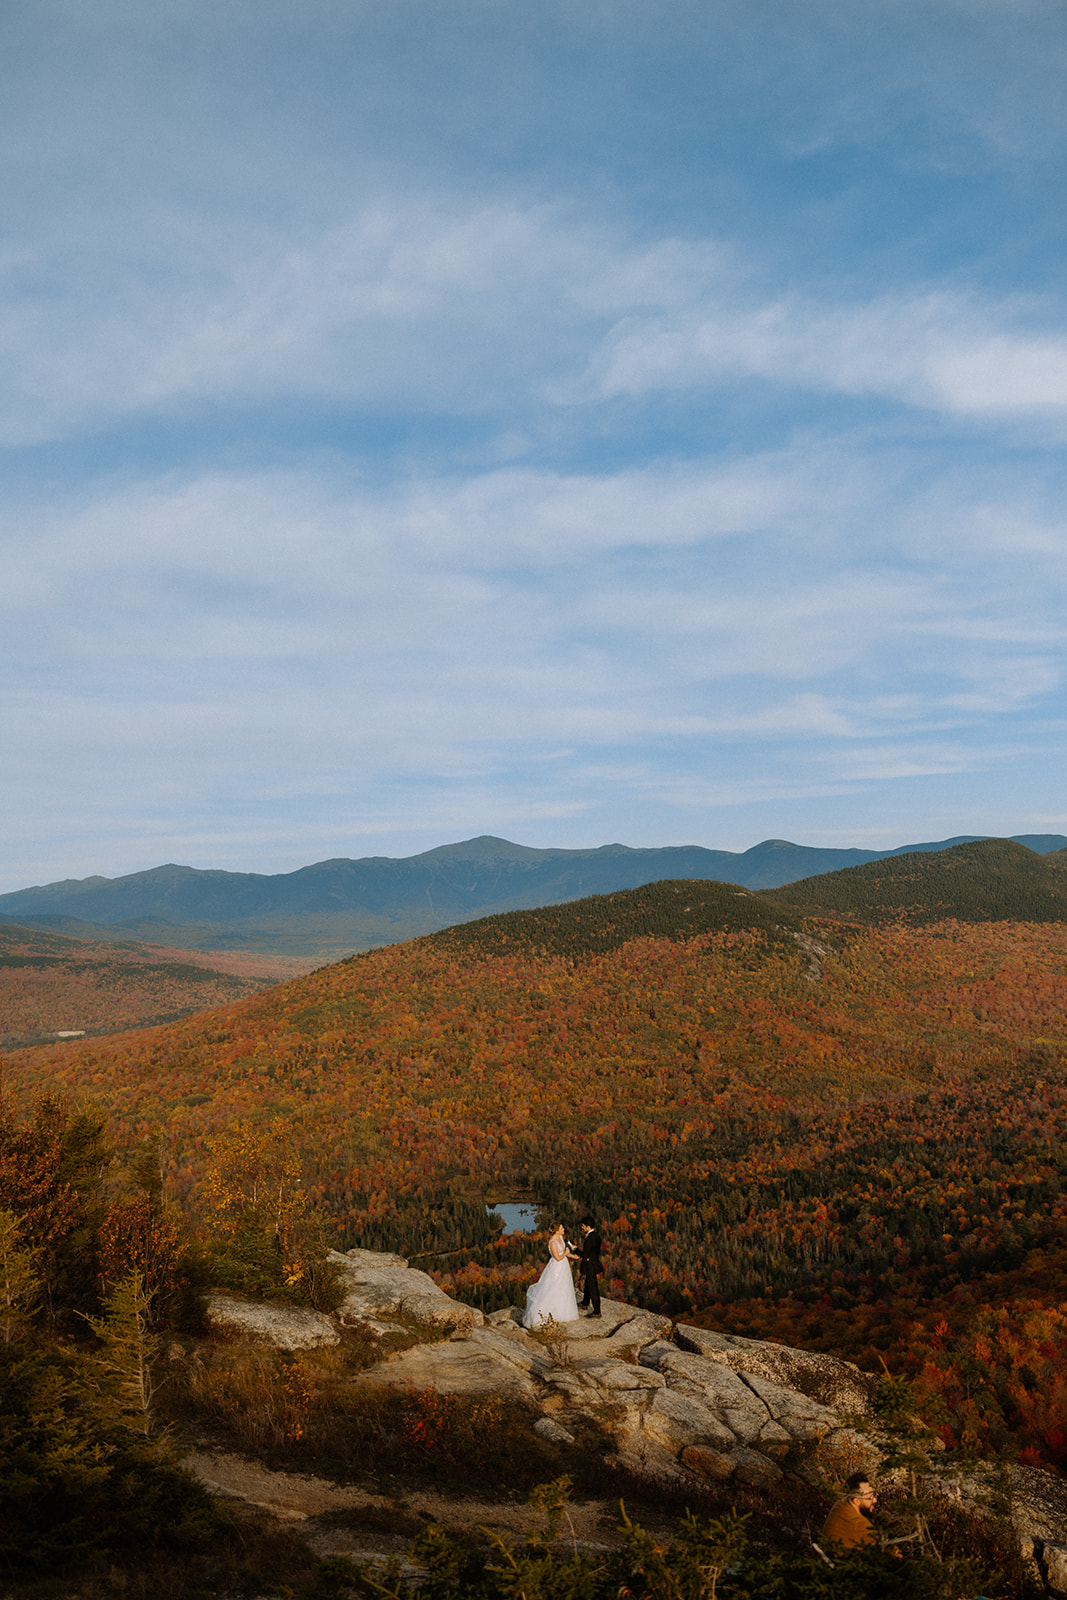 A couple who eloped in the White Mountains say their vows in front of Mount Washington